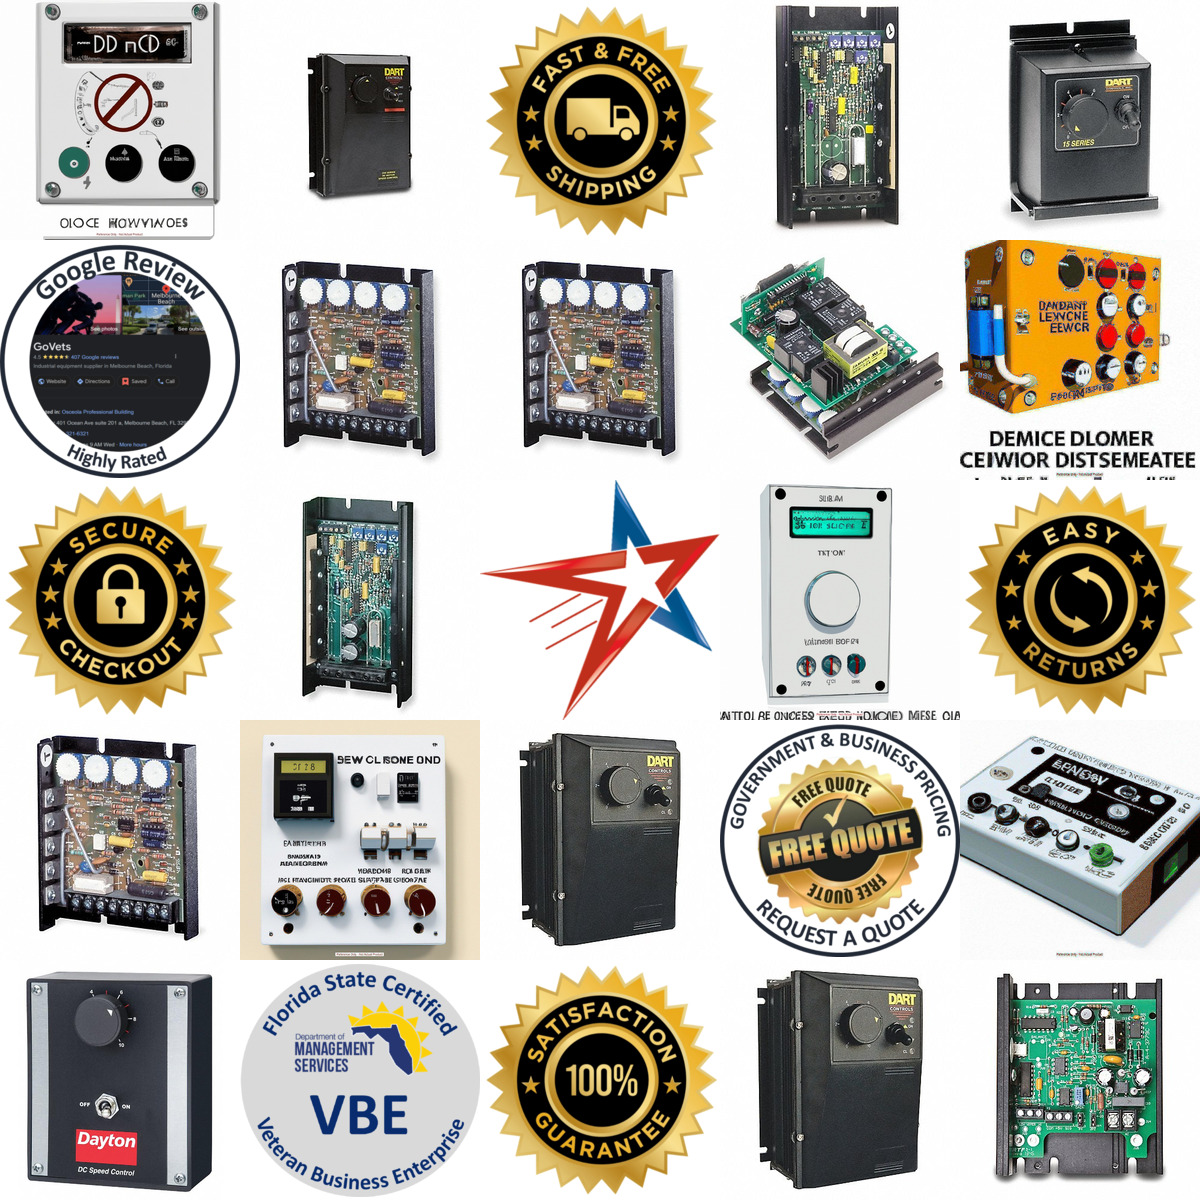 A selection of dc Speed Controls products on GoVets